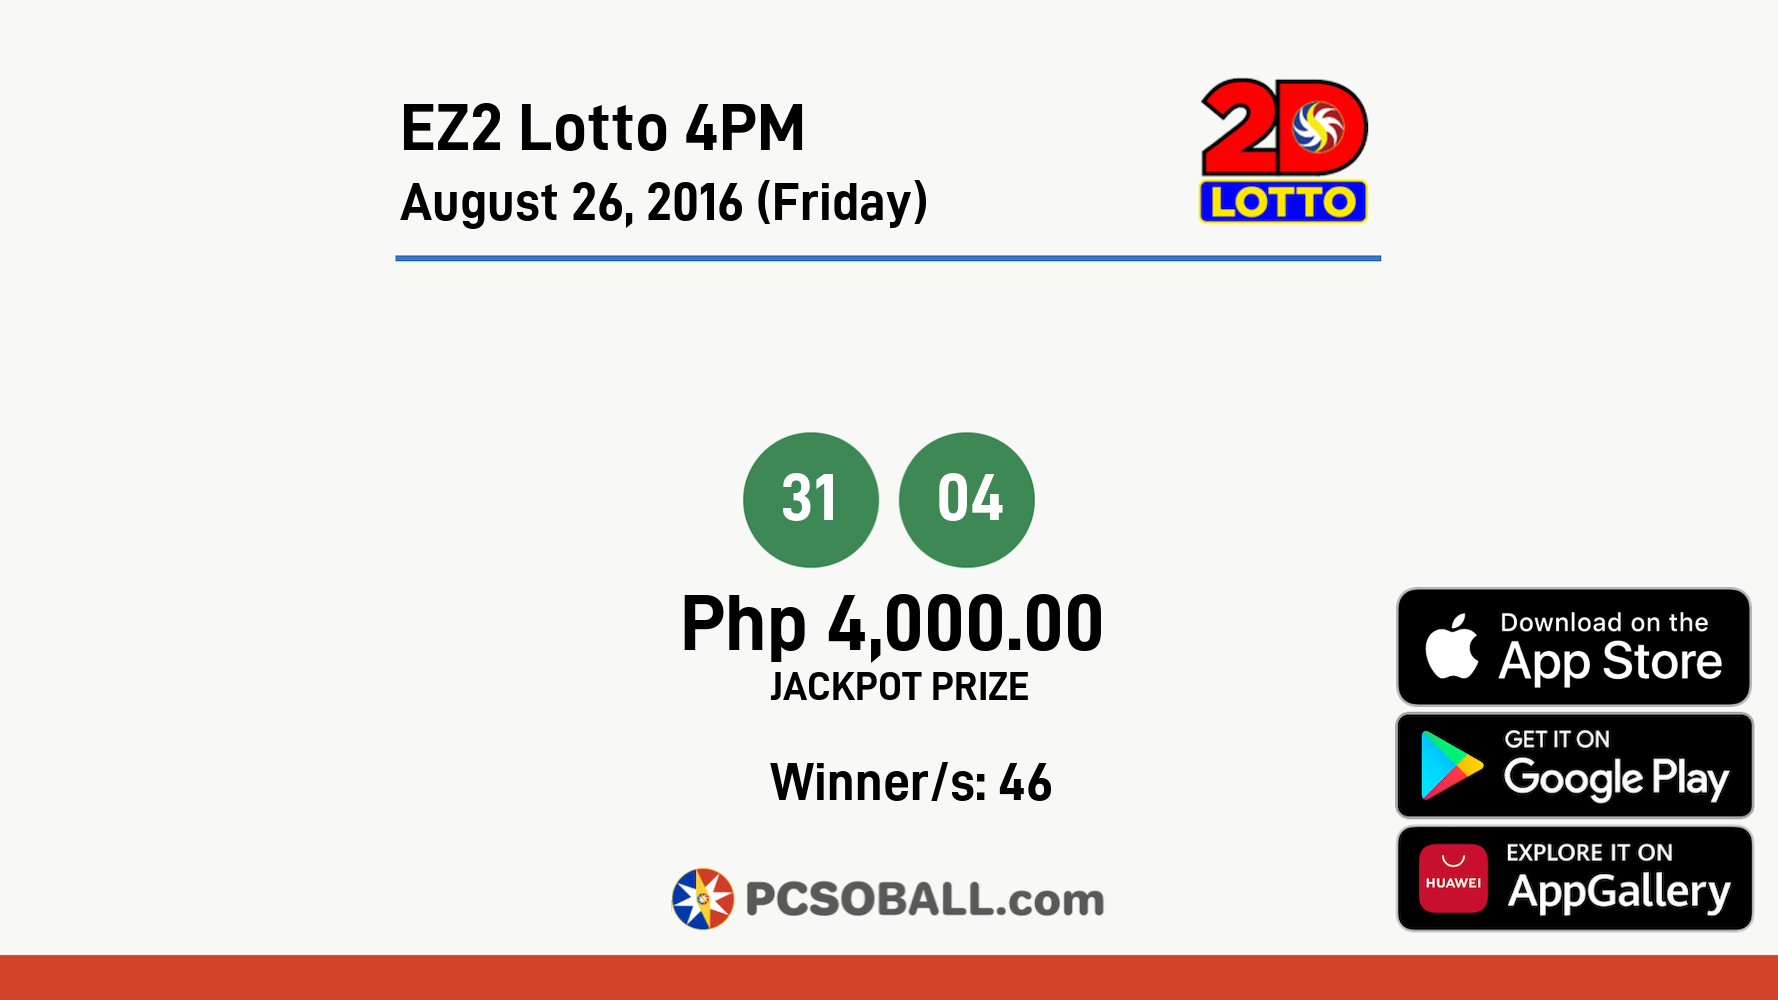 EZ2 Lotto 4PM August 26, 2016 (Friday) Result